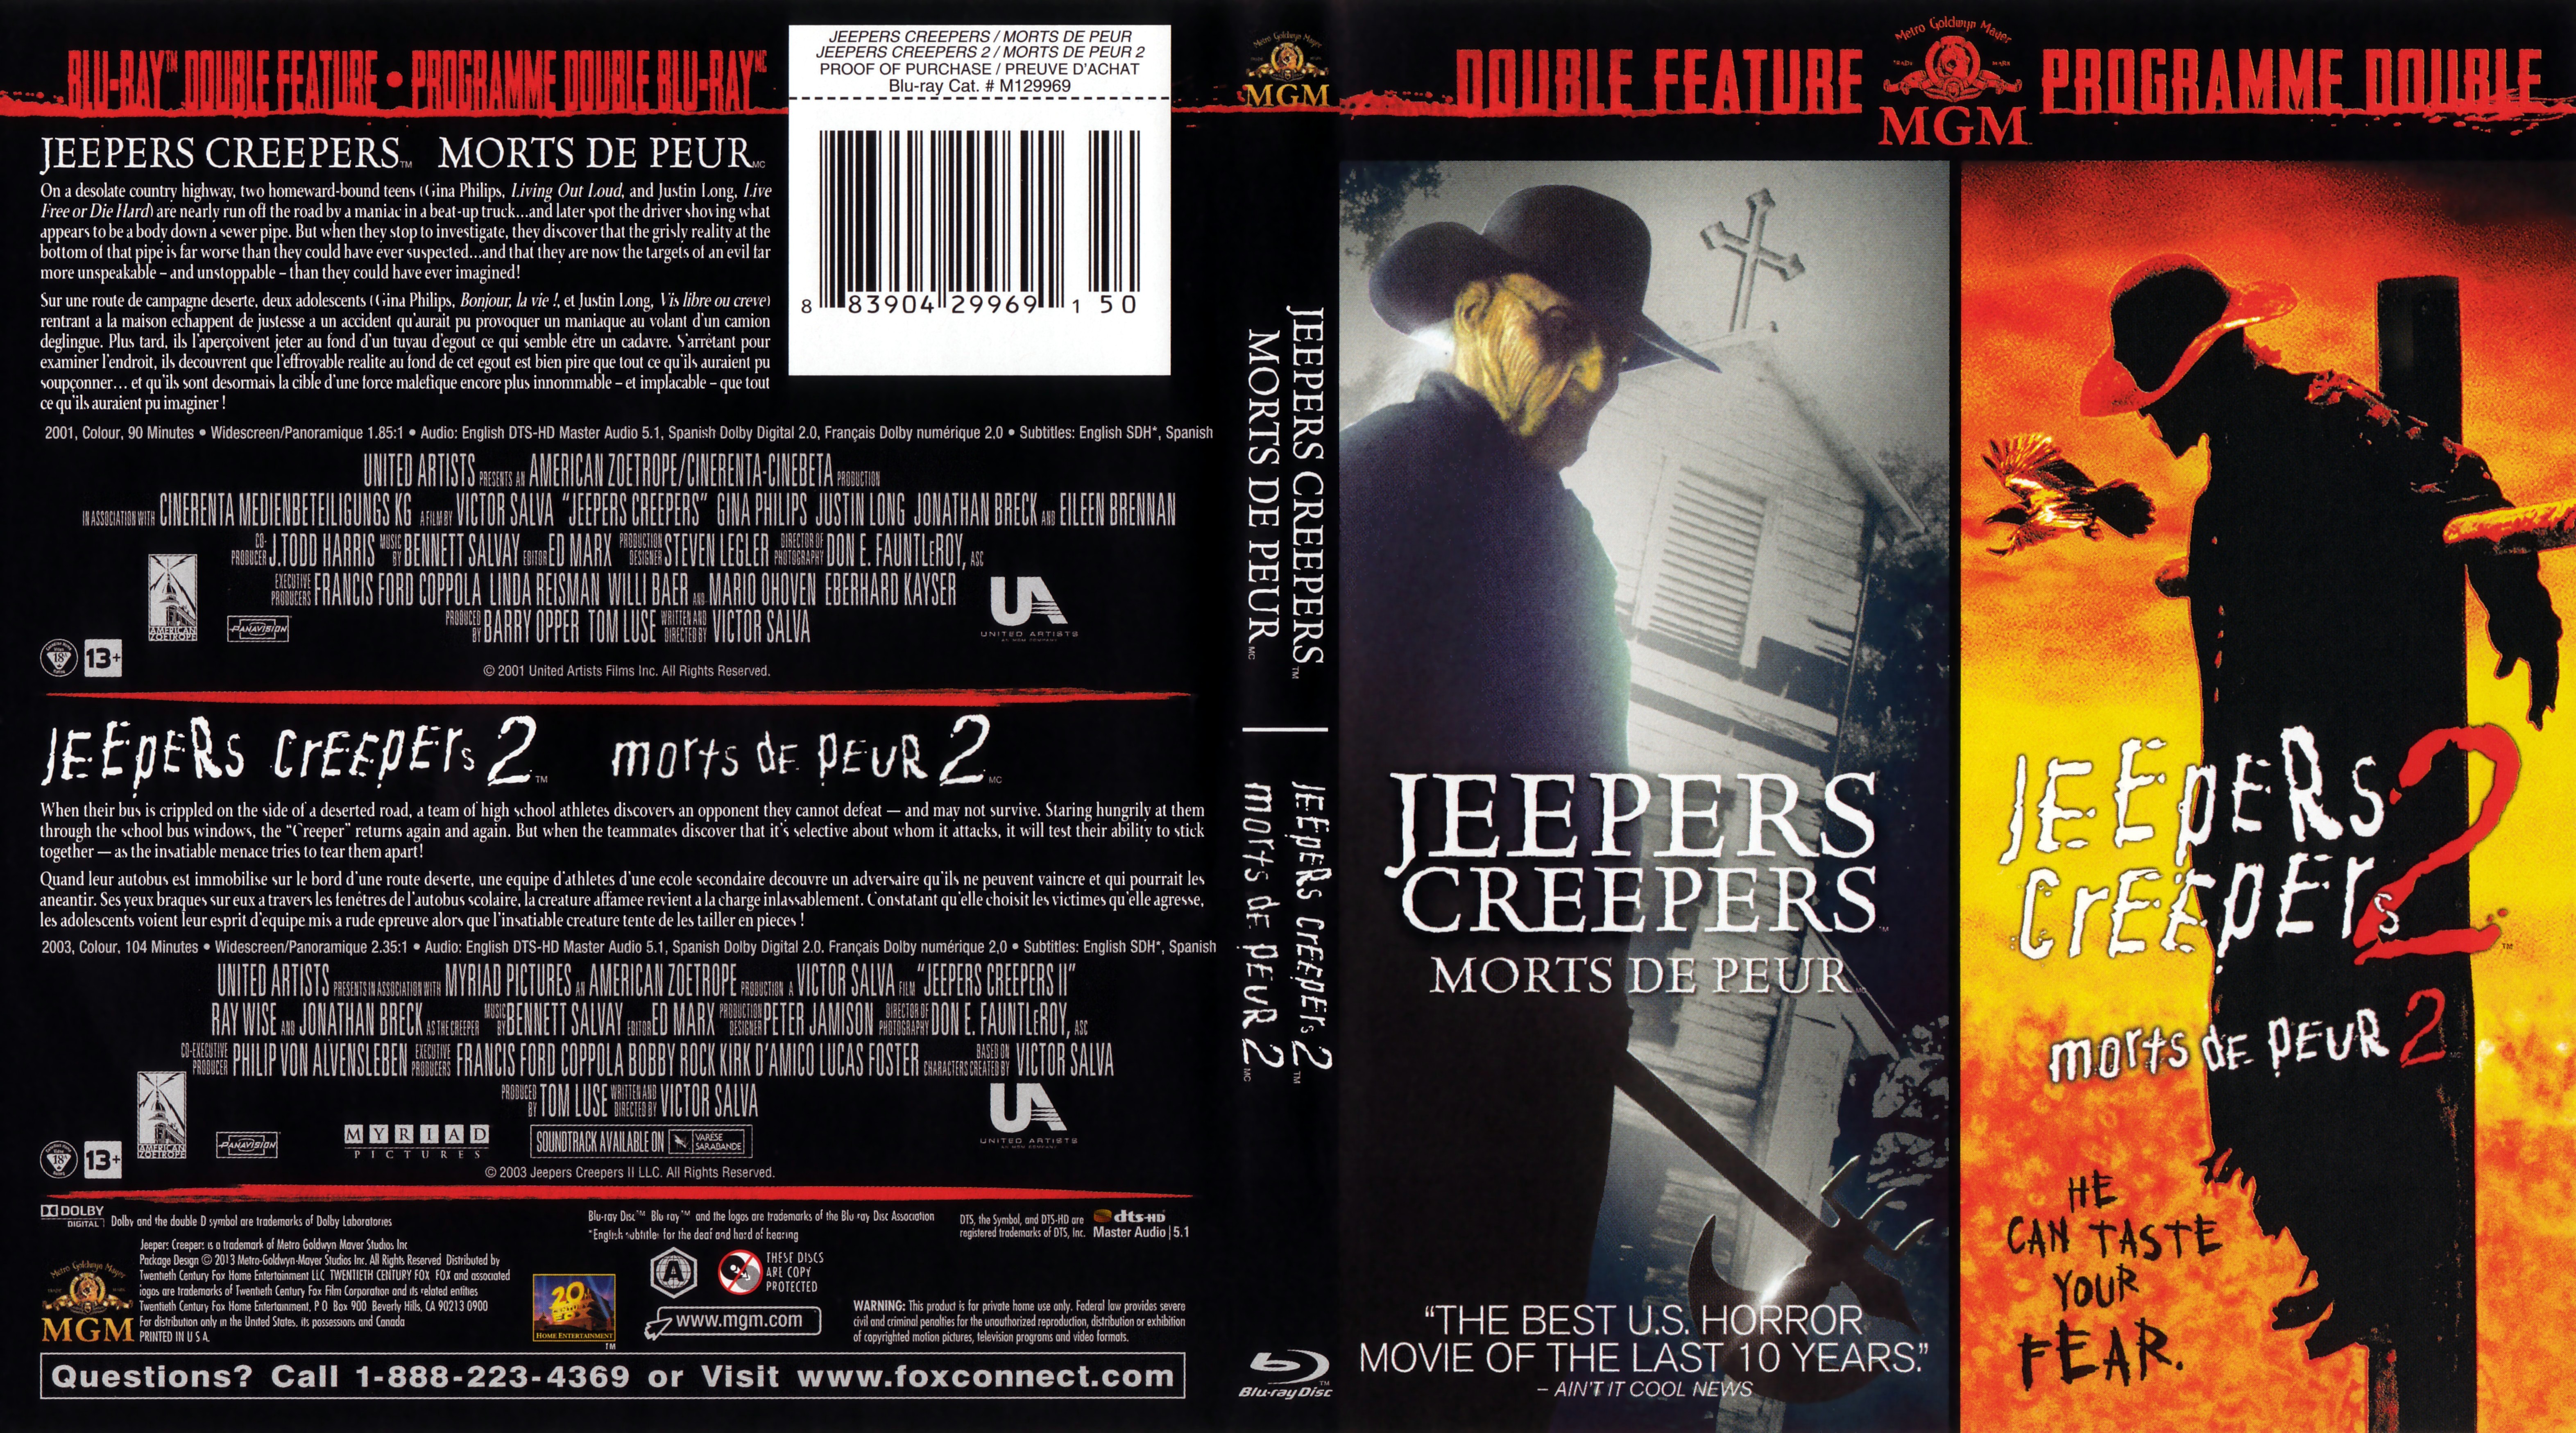 Jaquette DVD Jeepers Creepers - Mort de peur 1 + 2 (Canadienne) (BLU-RAY)